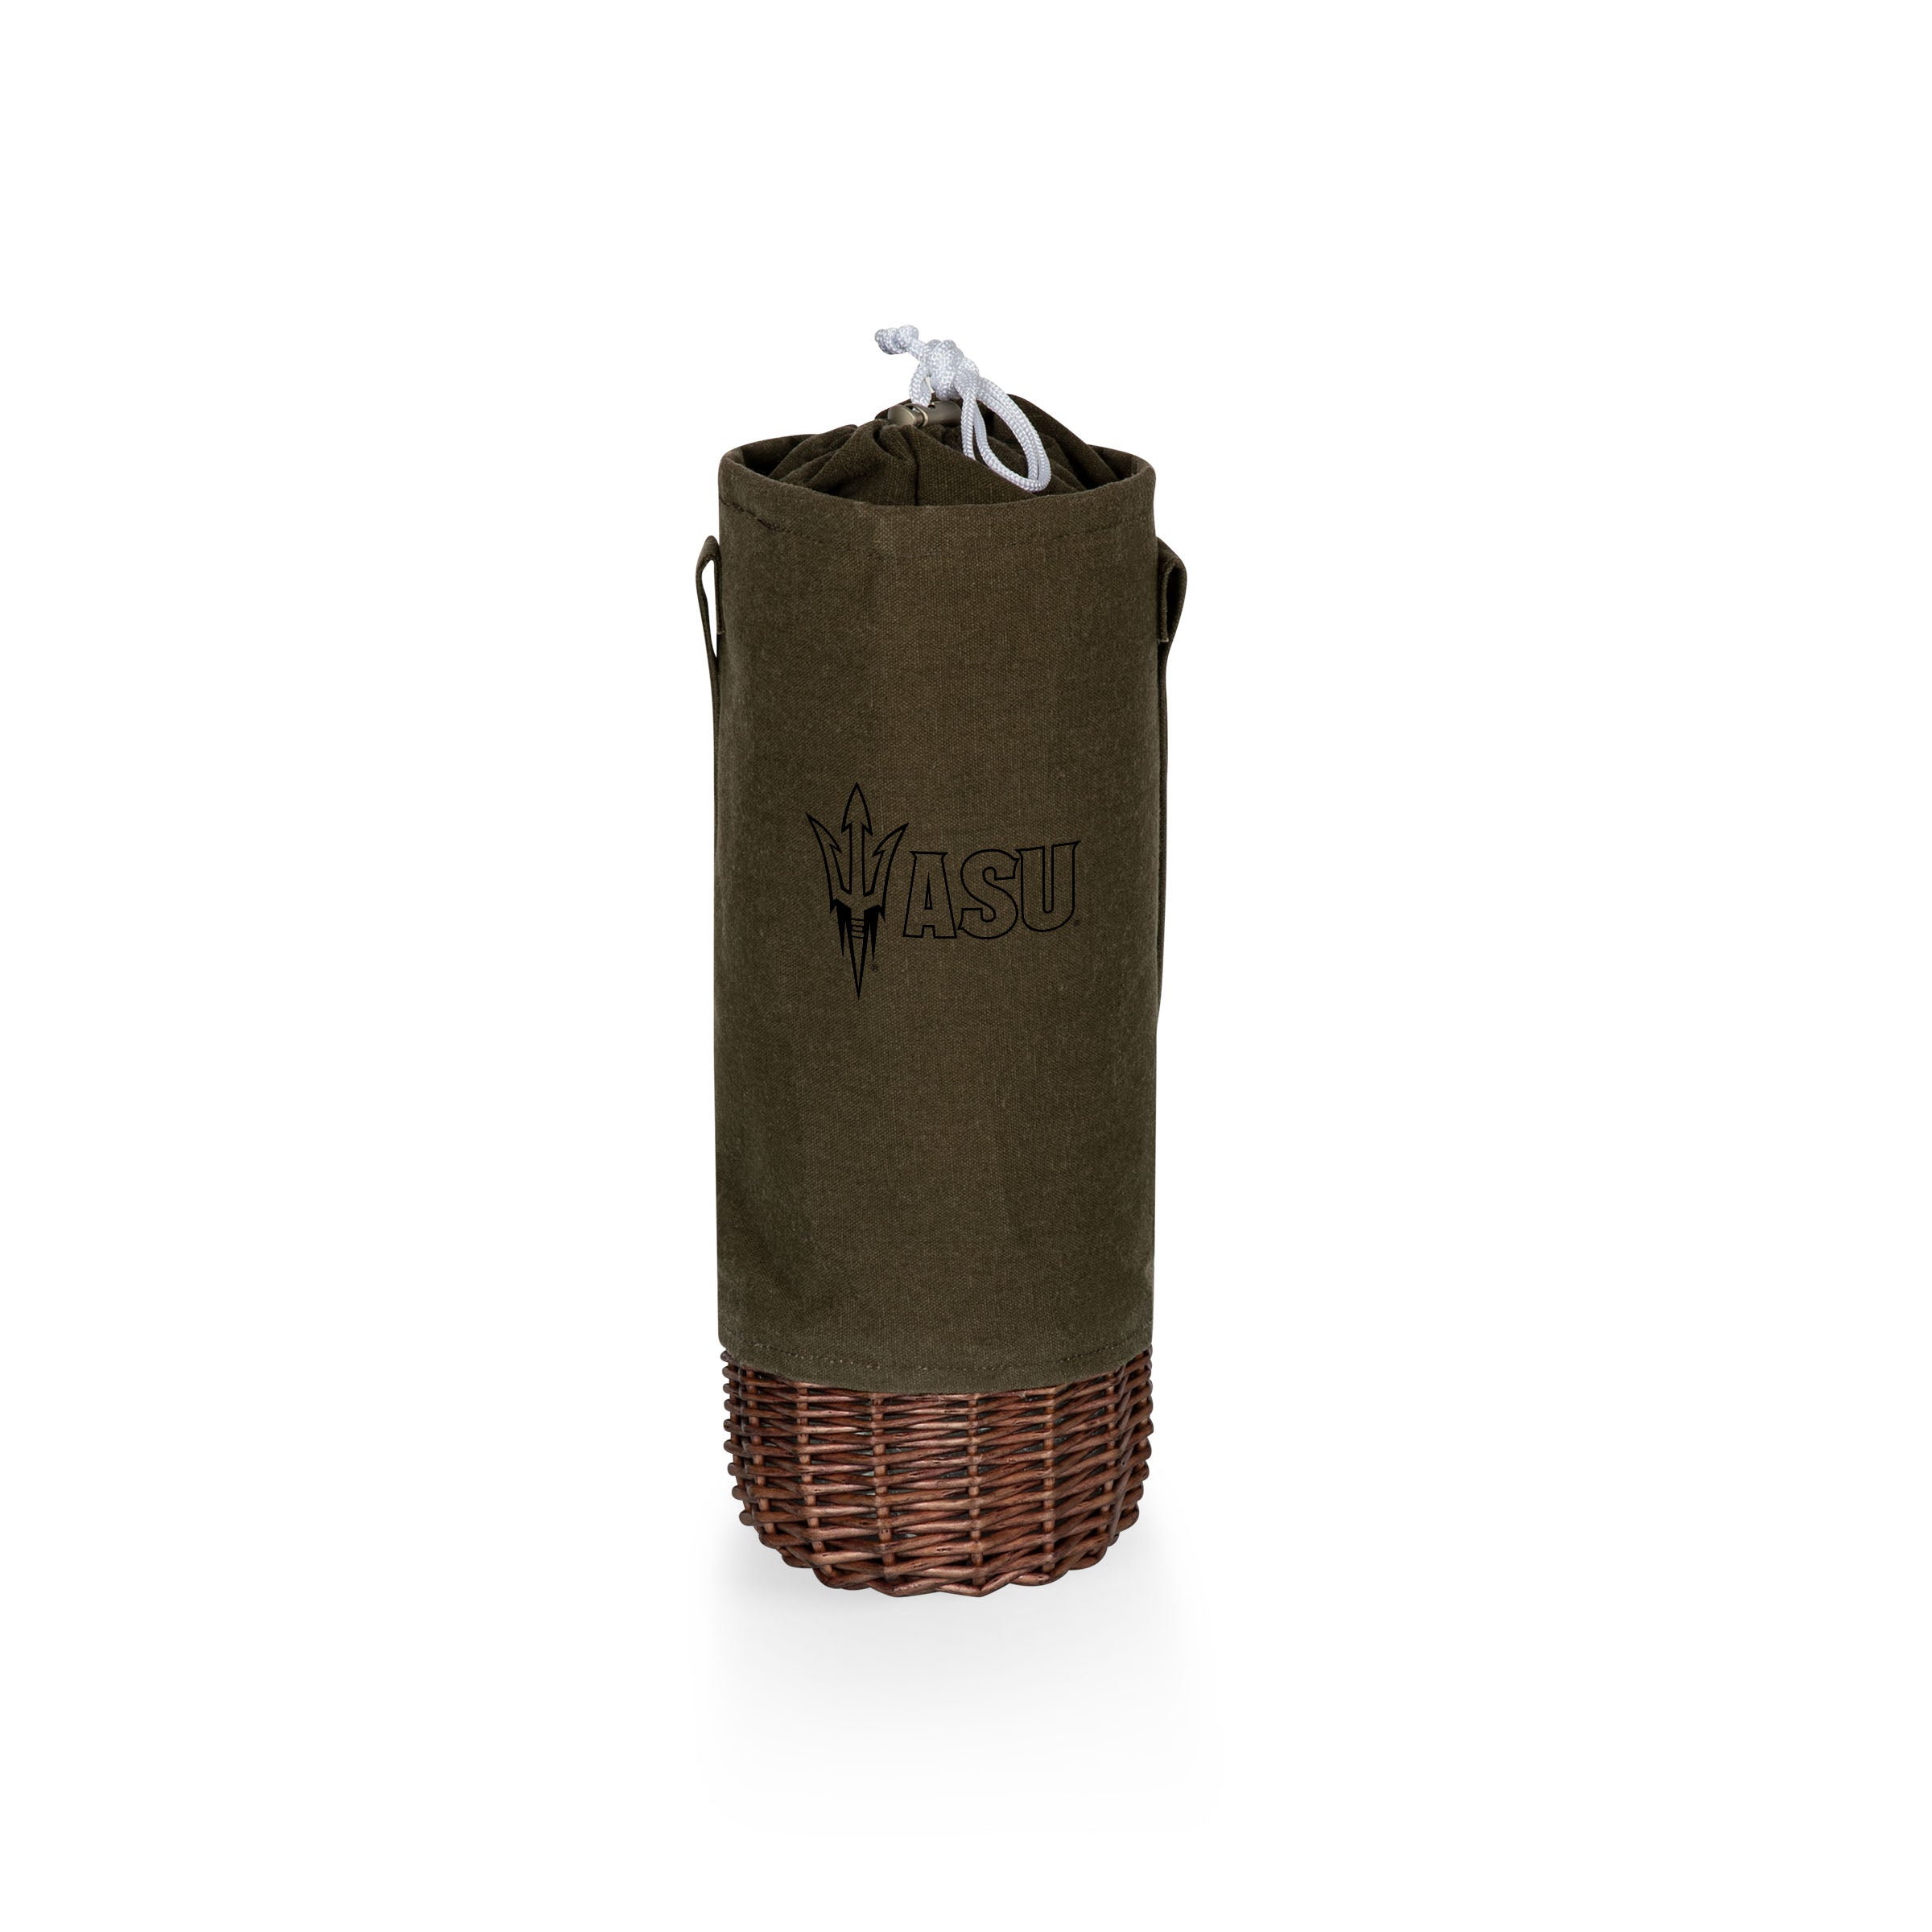 Arizona State Sun Devils - Malbec Insulated Canvas and Willow Wine Bottle Basket